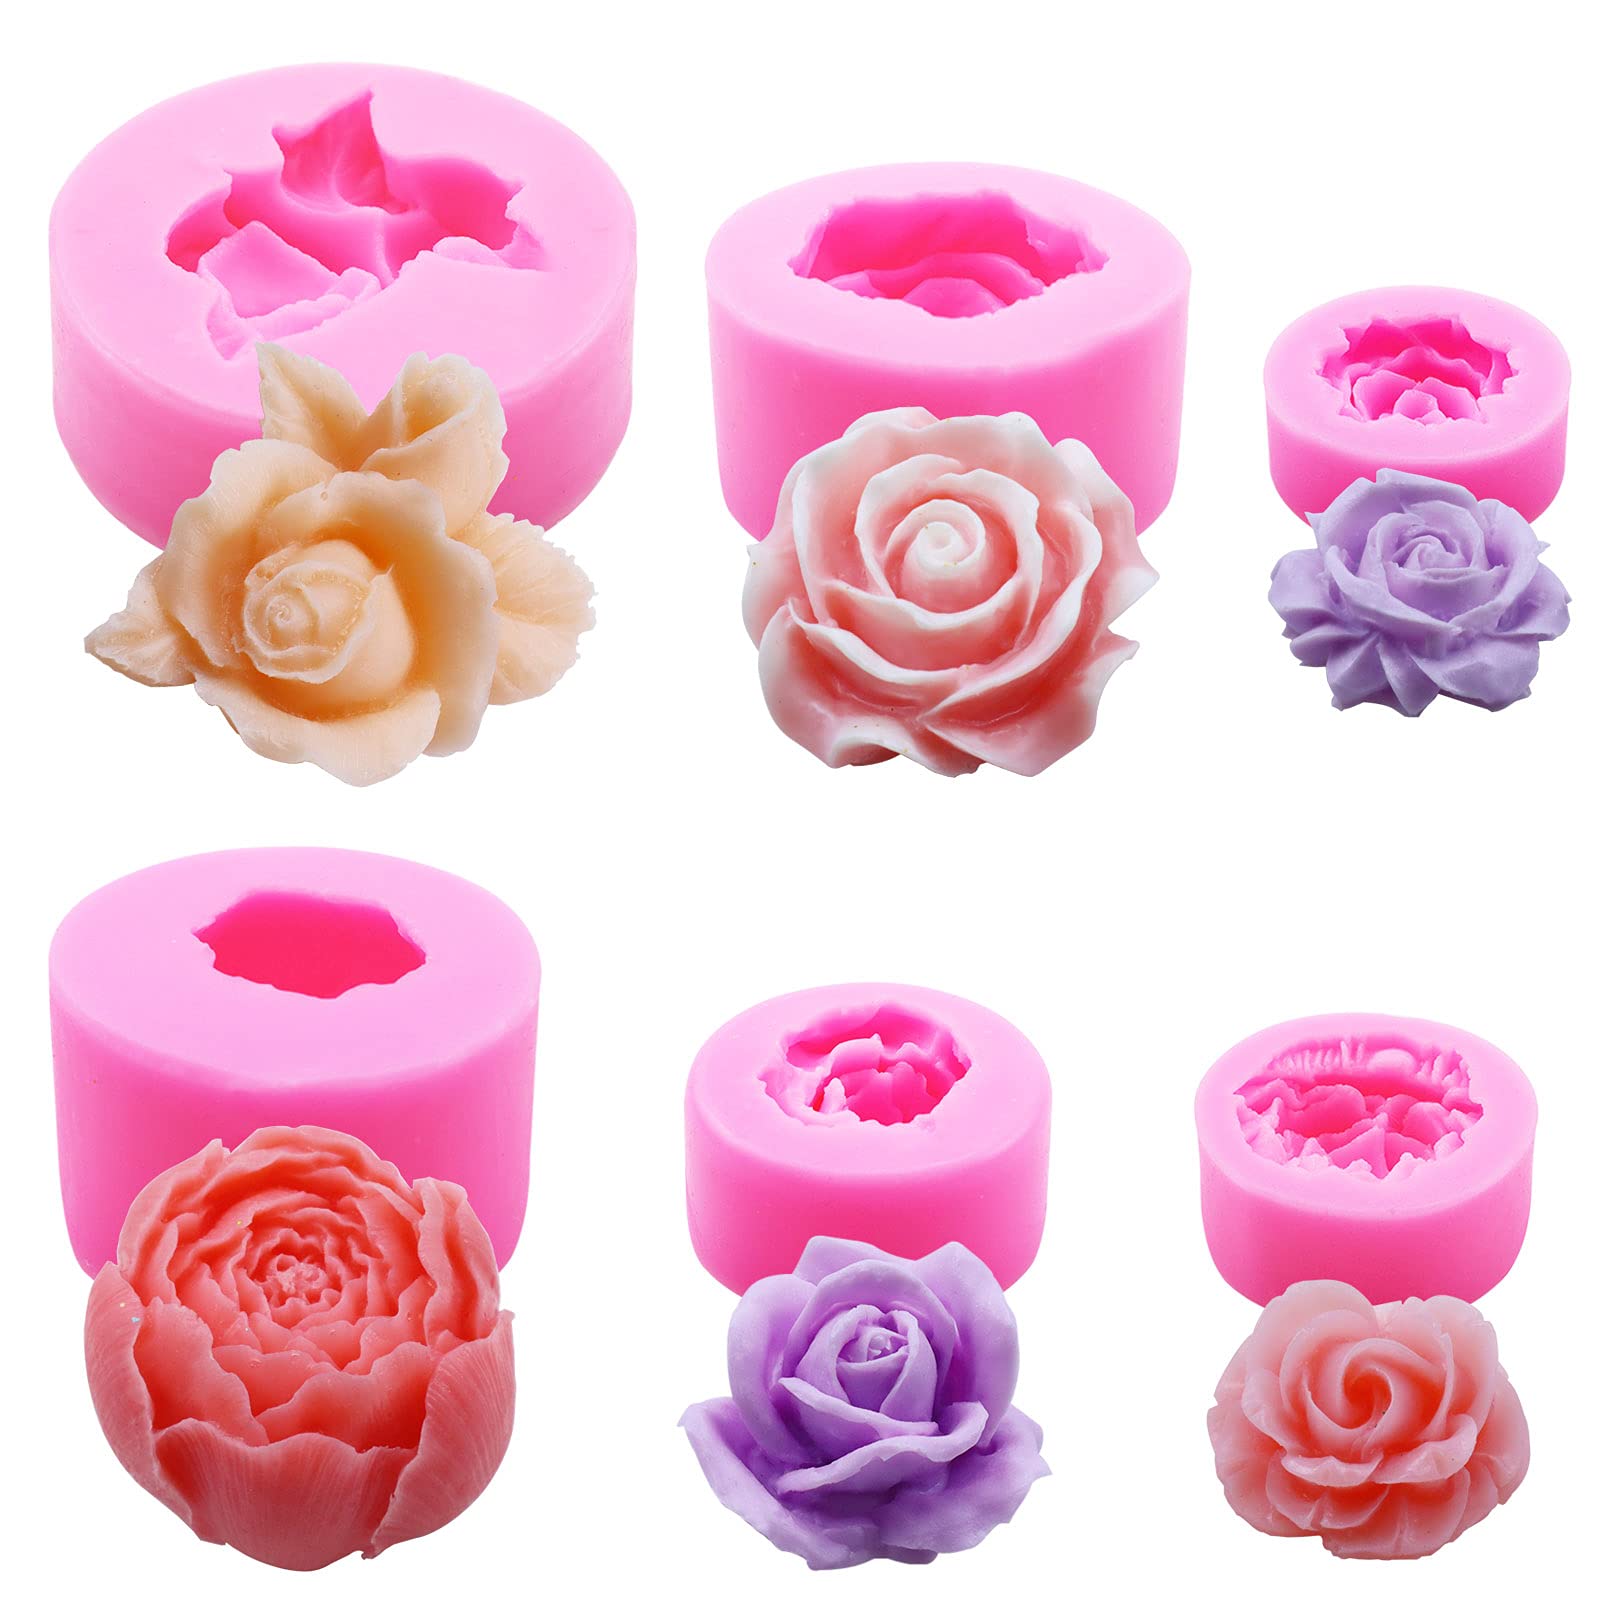 Extra Large 3d Rose Silicone Mold for Soap. Flower Silicone Mold